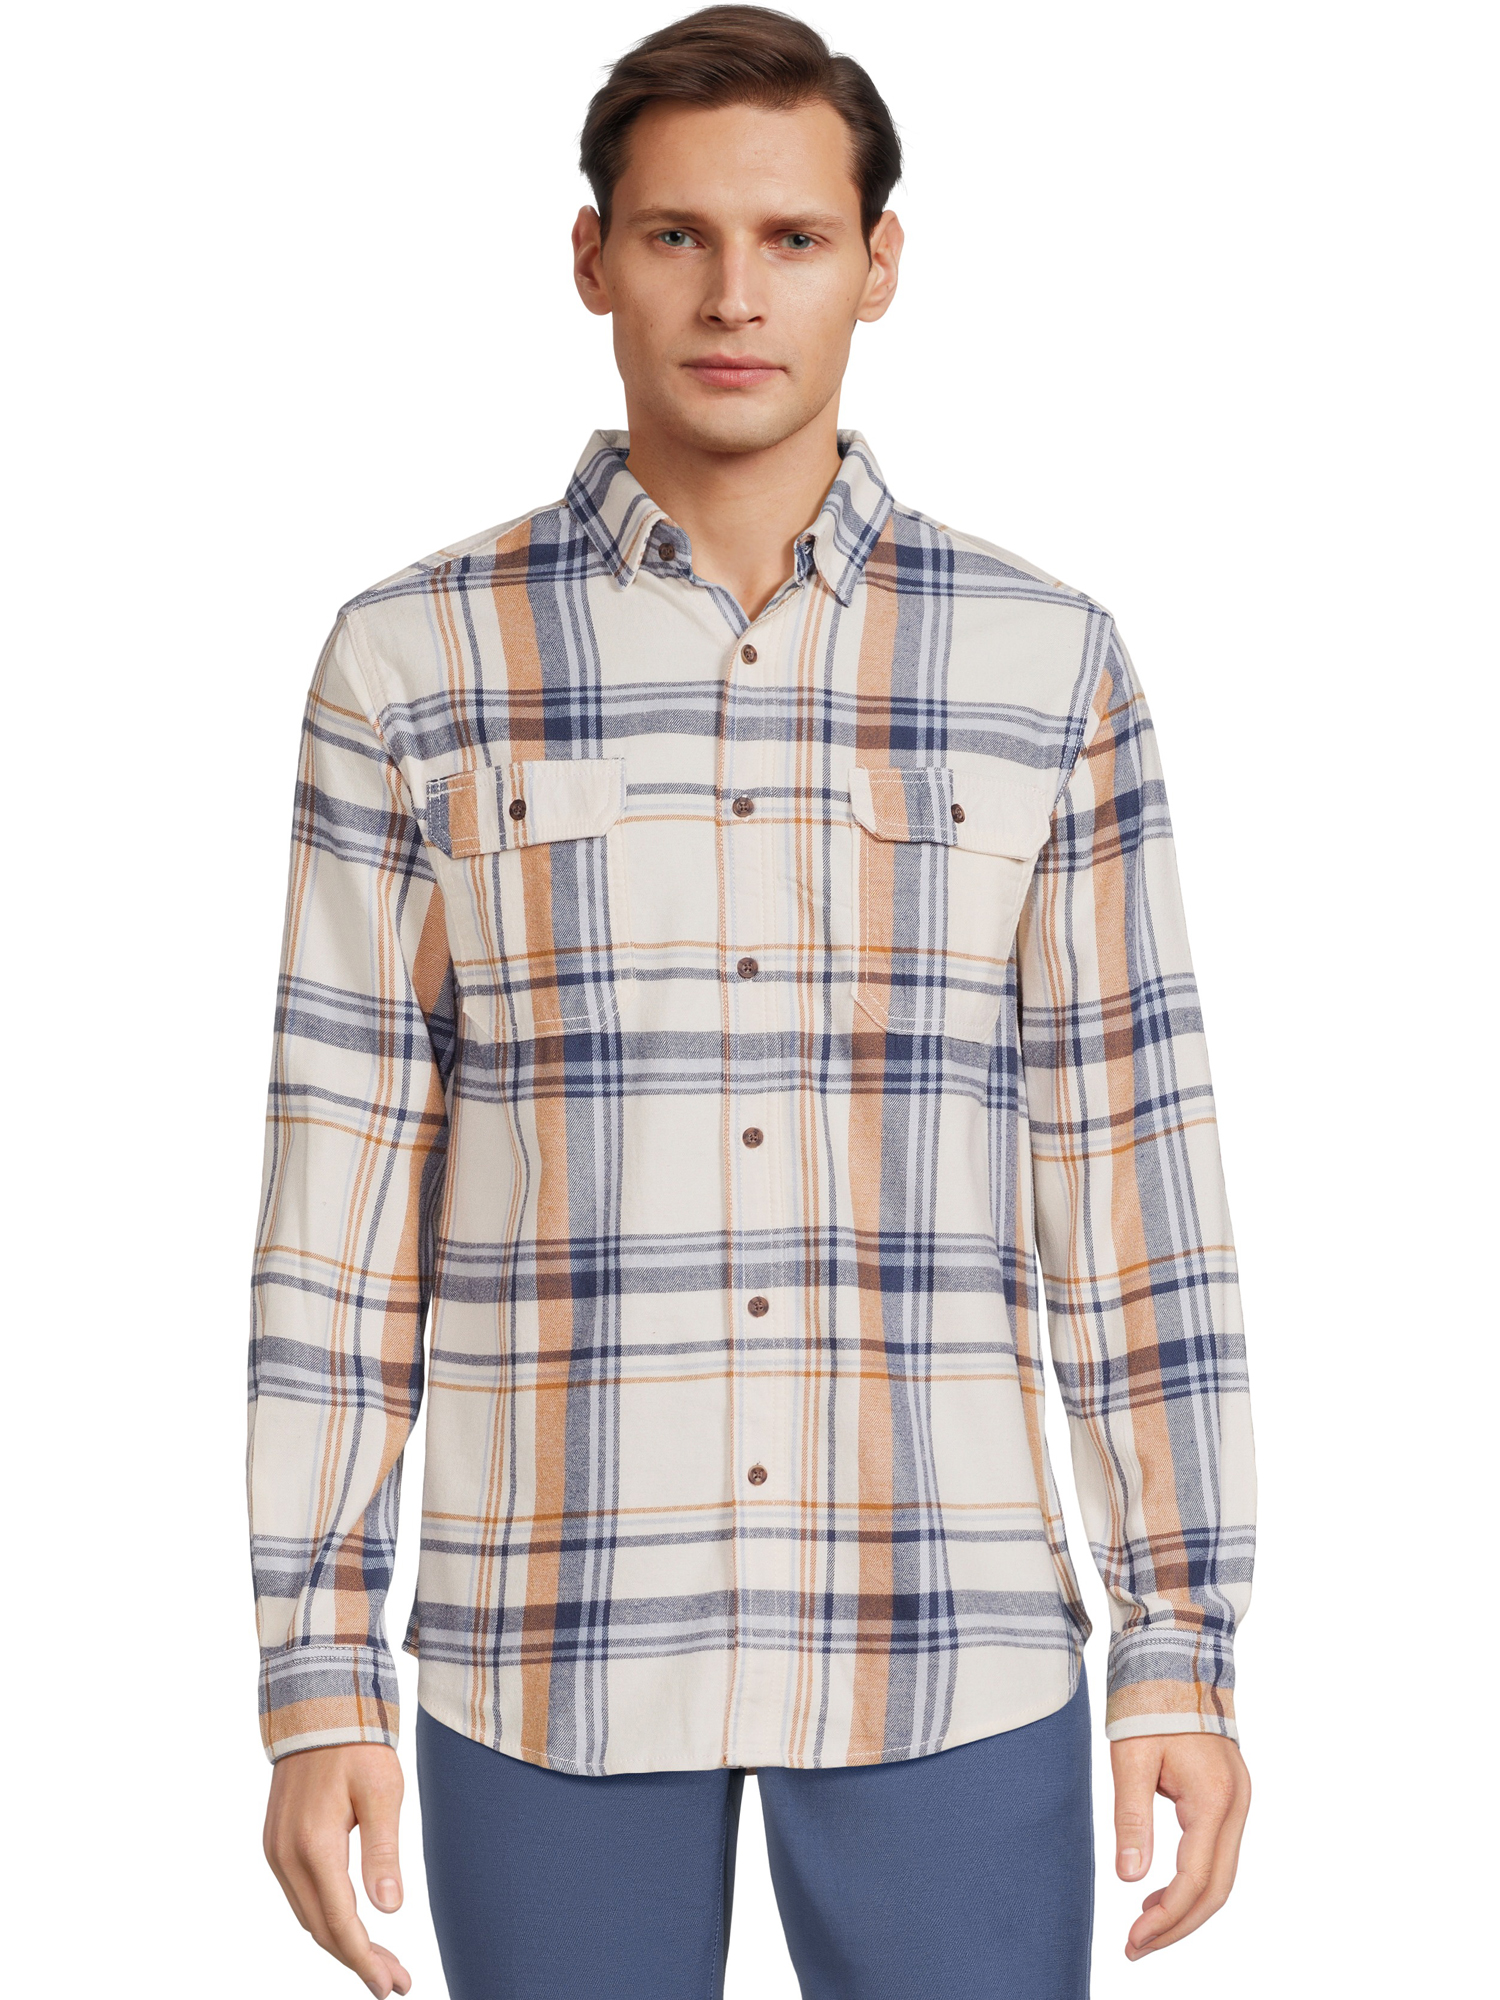 George Men's Long Sleeve Flannel Shirts, 2-Pack, Sizes S-2XL - image 2 of 5